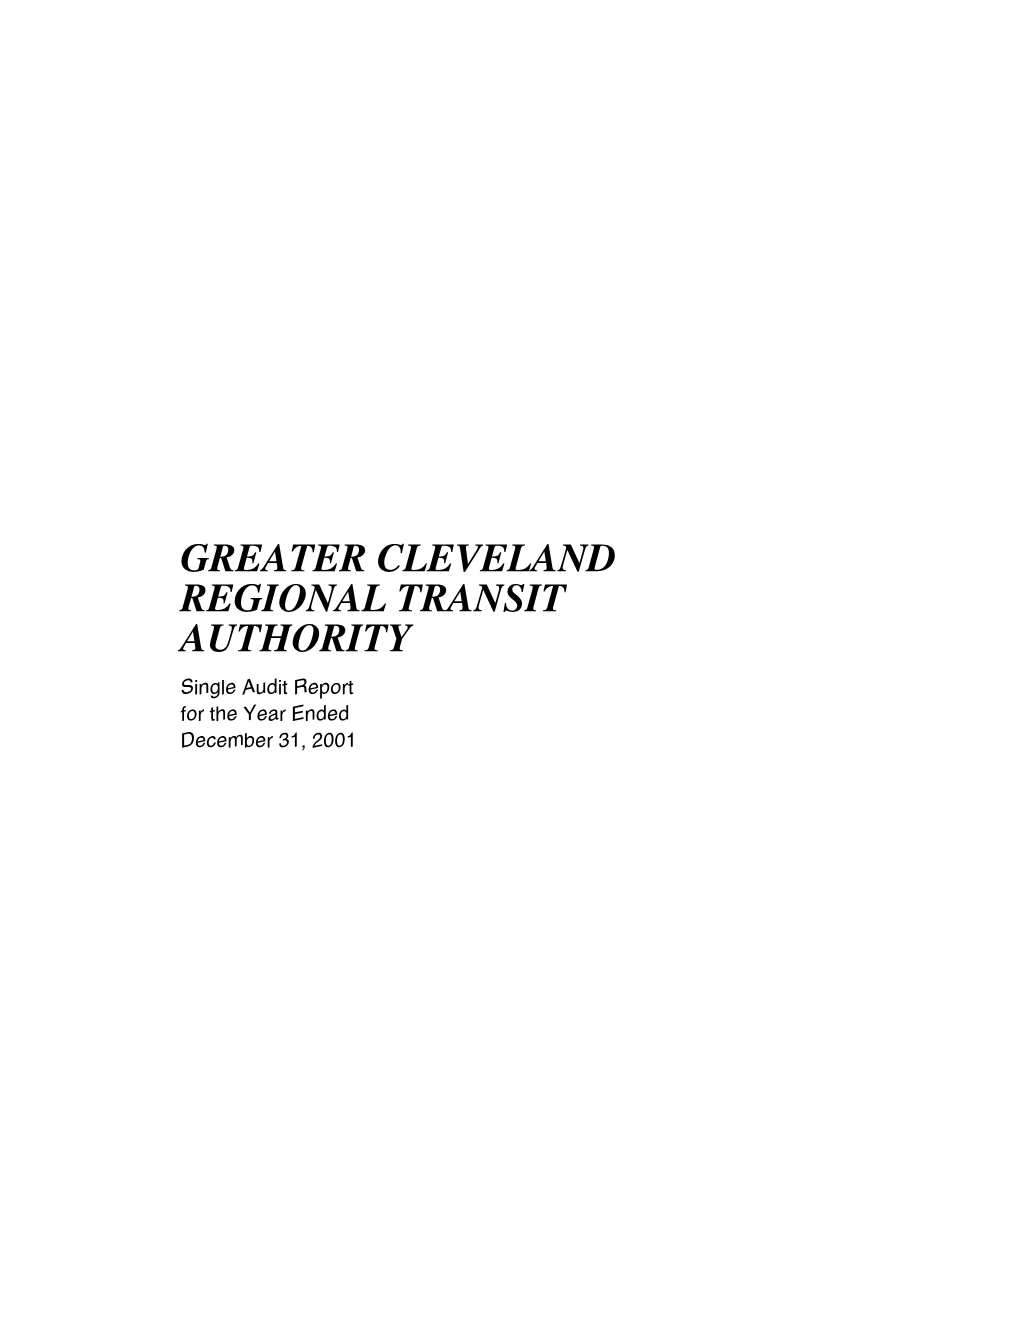 GREATER CLEVELAND REGIONAL TRANSIT AUTHORITY Single Audit Report for the Year Ended December 31, 2001